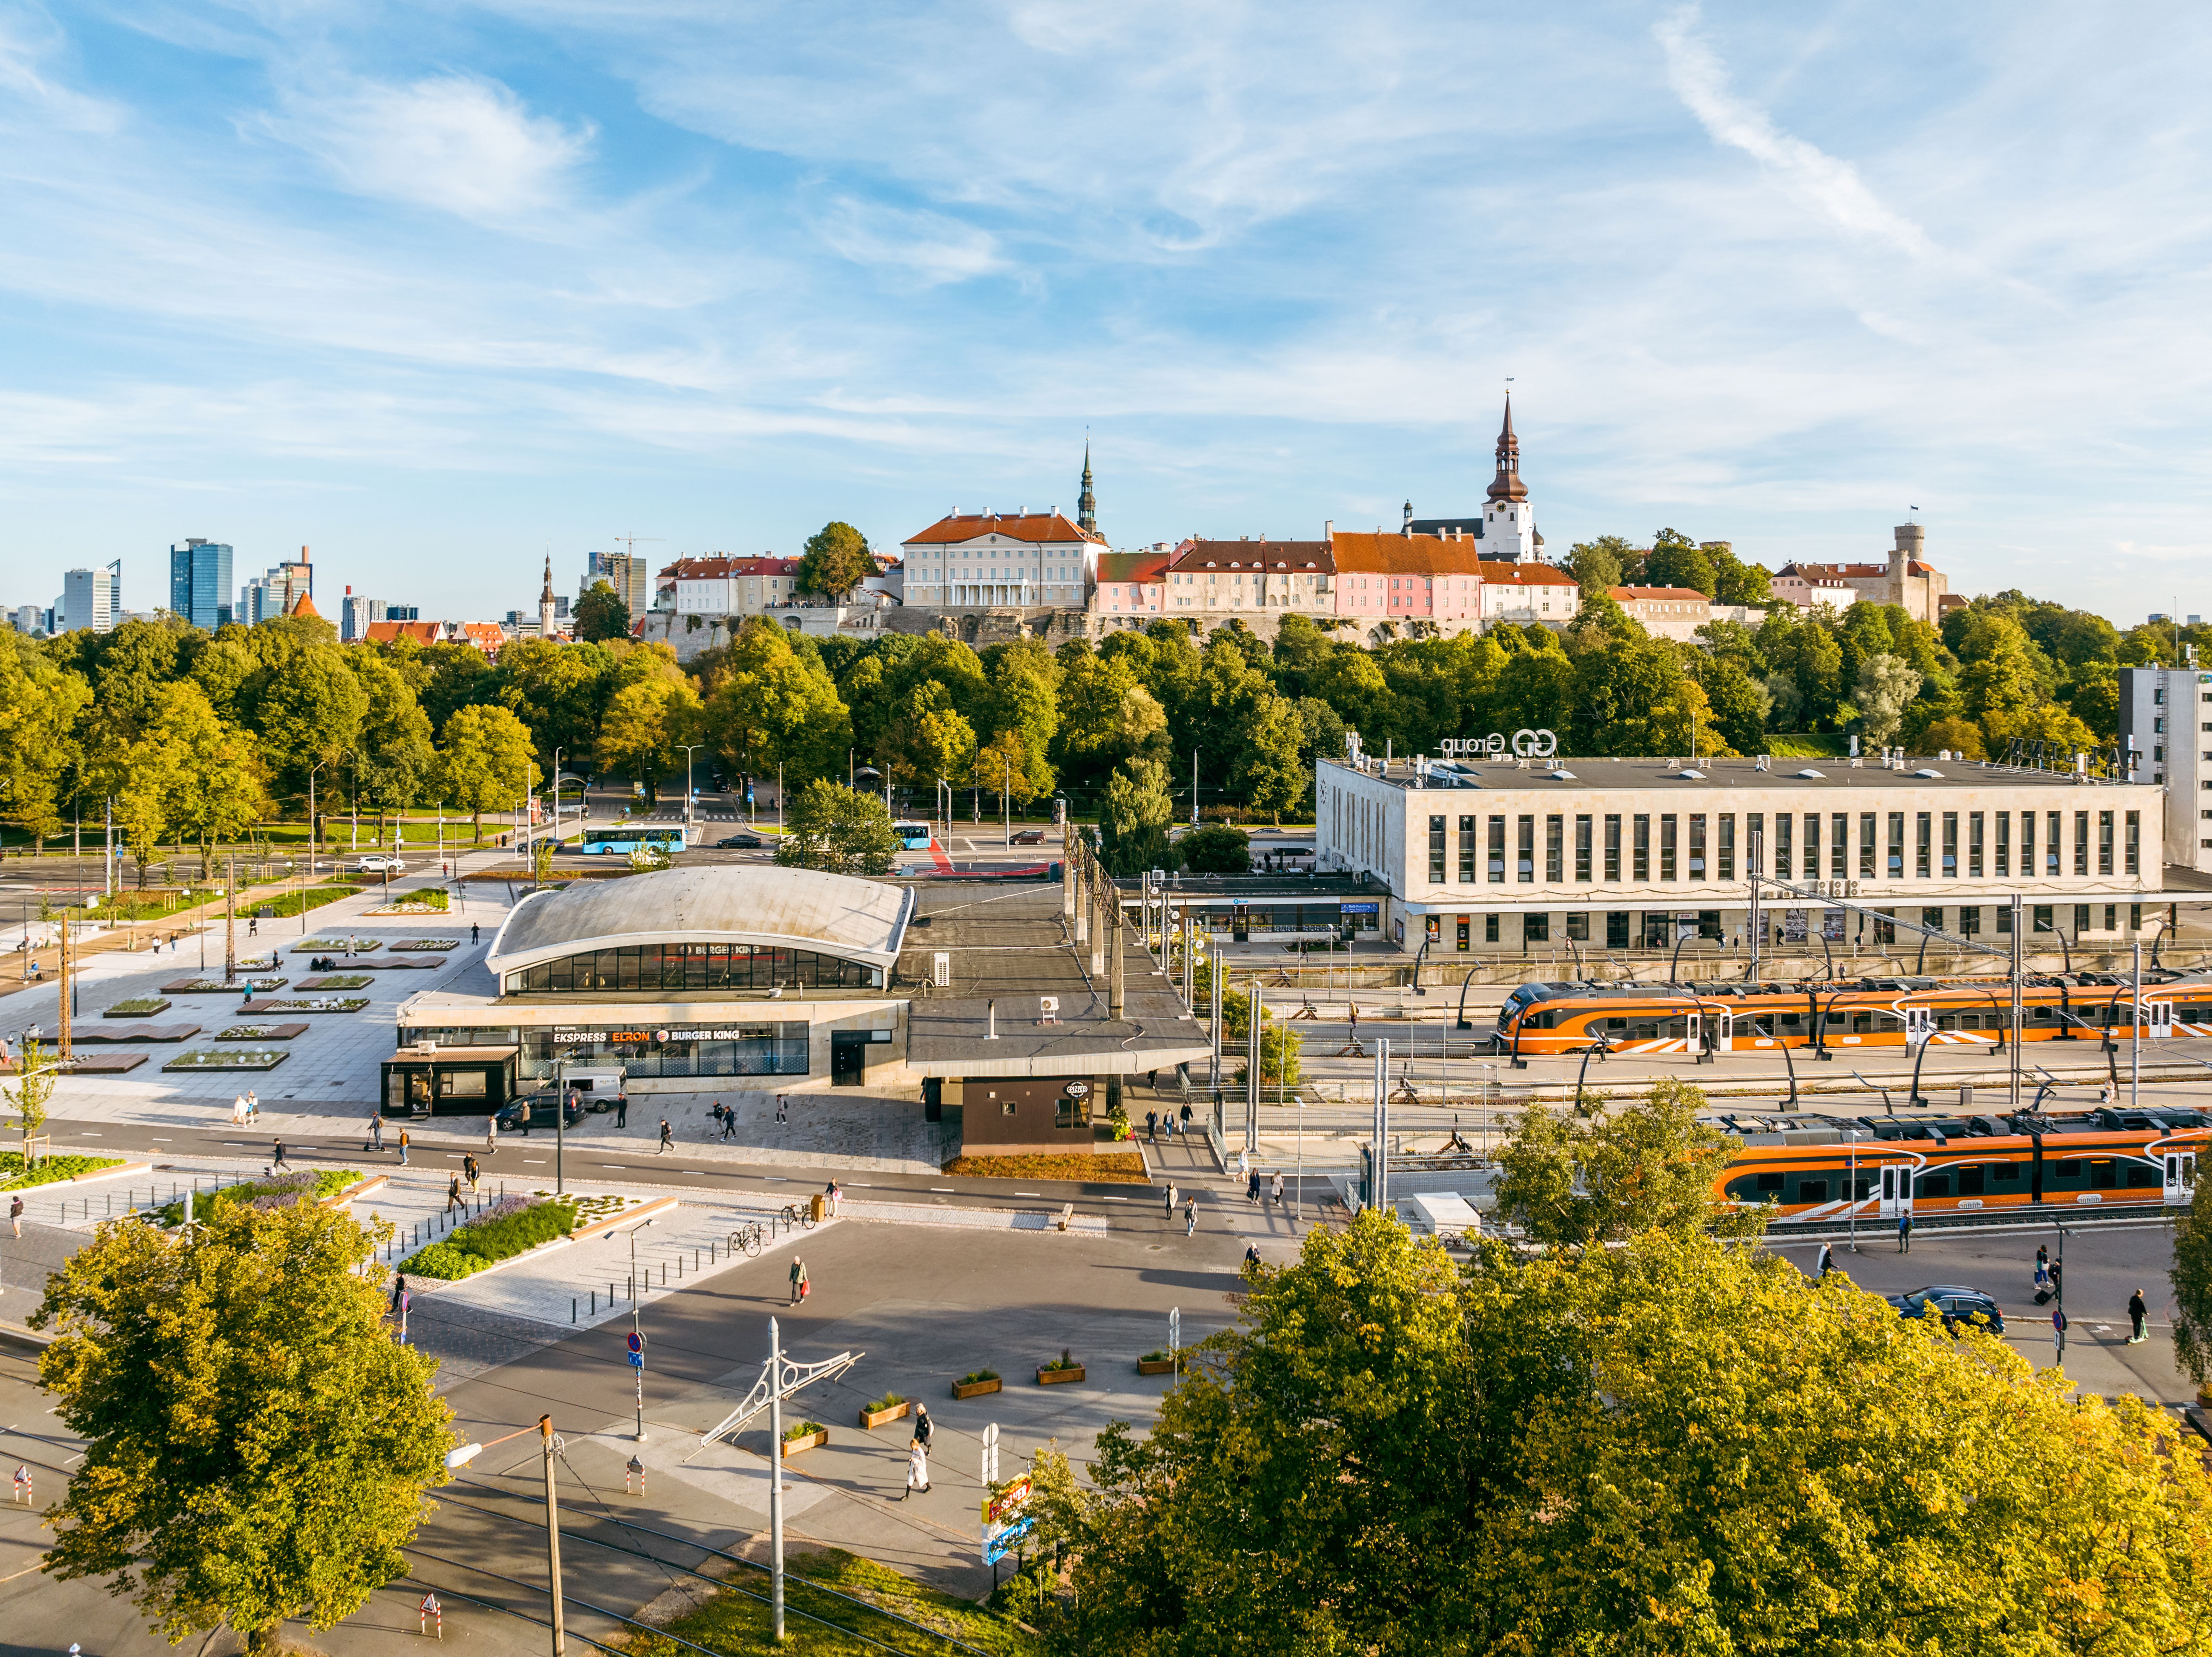 Aerial view of Tallinn's Balti Jaam train station with trains by the platforms, station buildings and a view of the Old Town in the background.